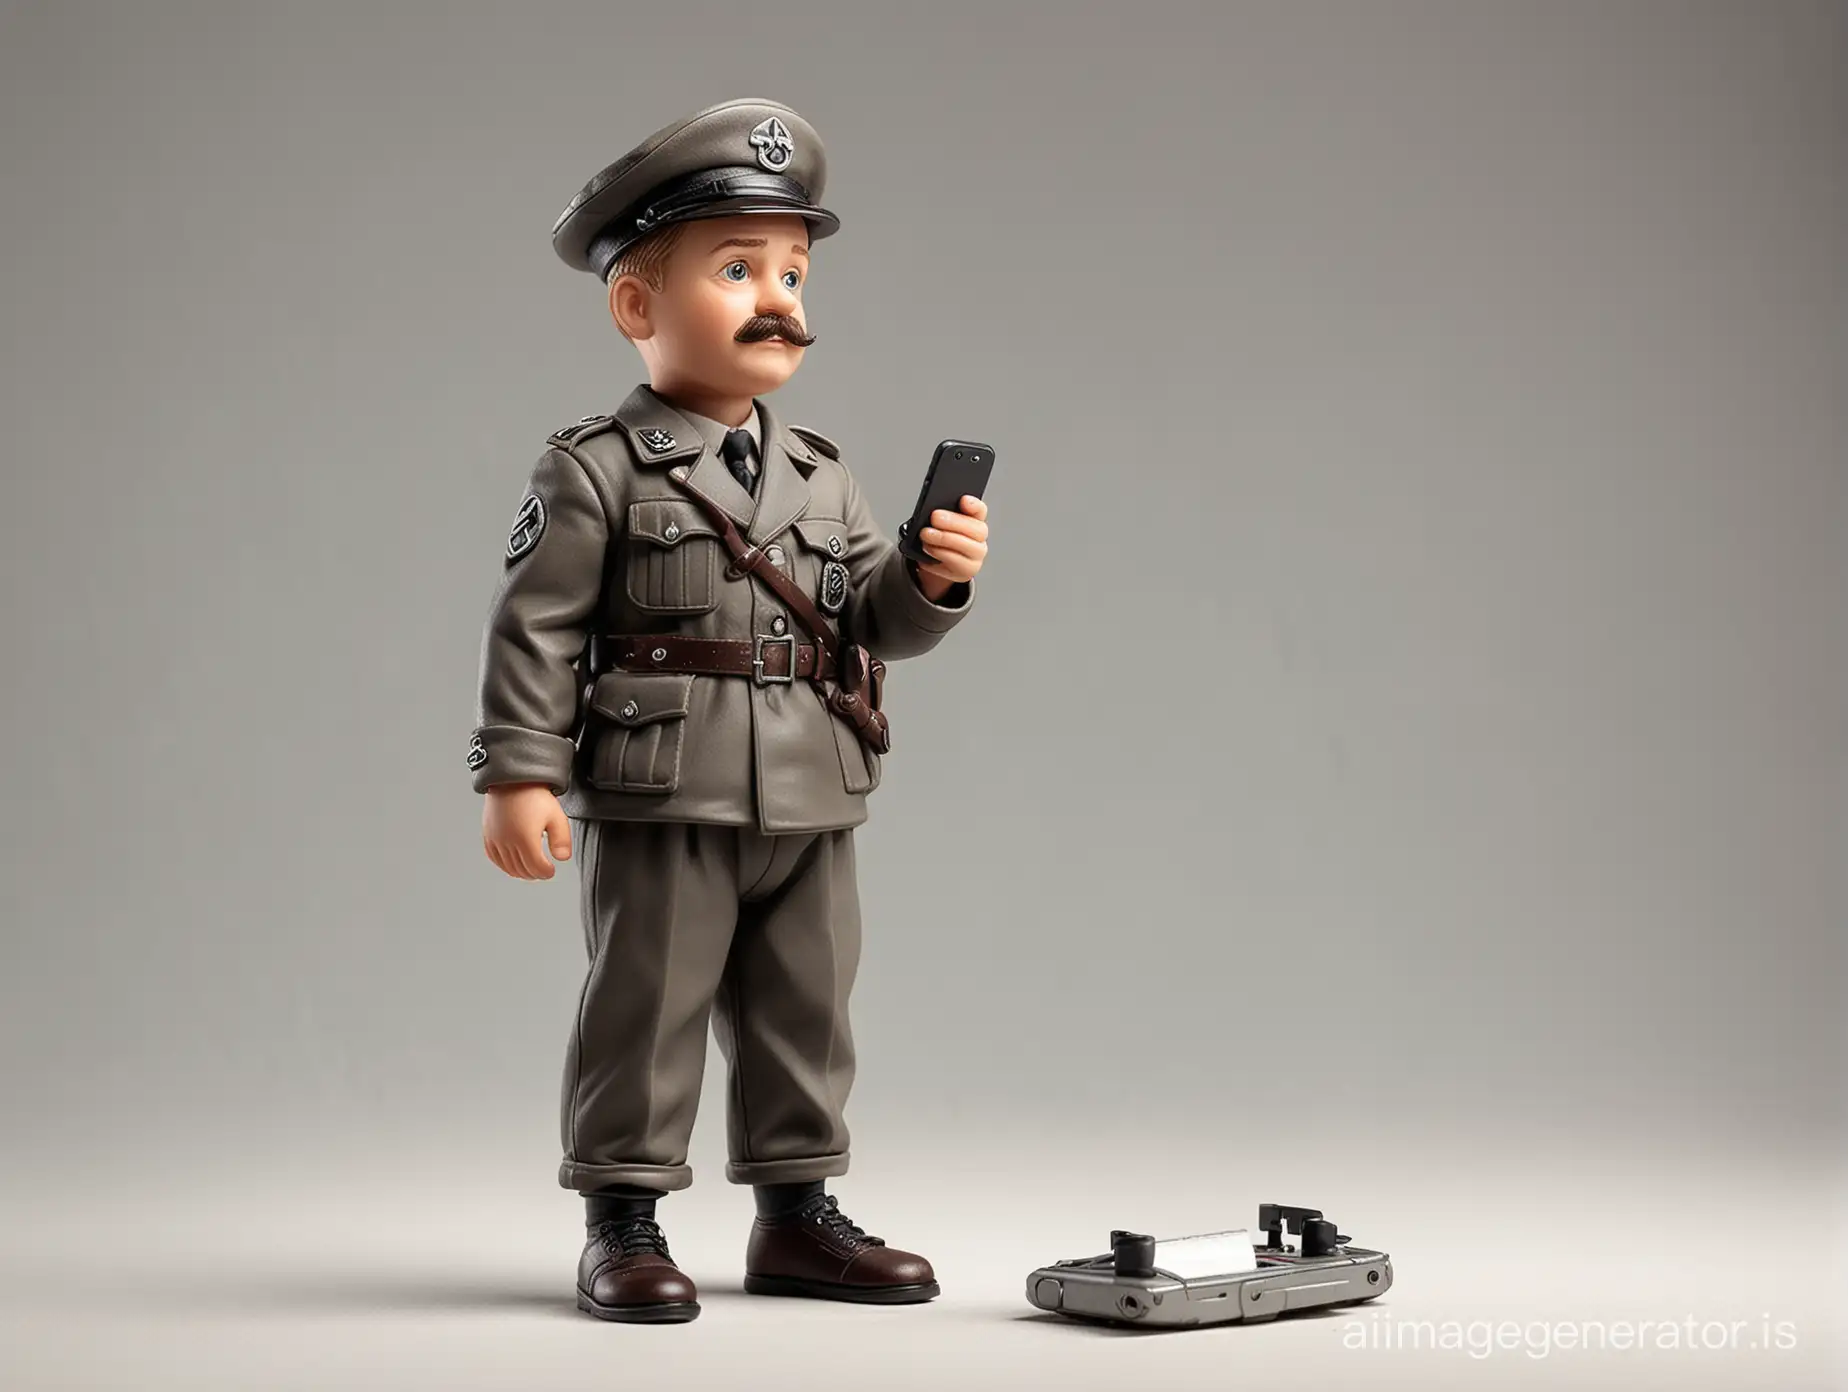 Miniature nazi kid,  toy, mustache, full body, staring at his phone, isolated